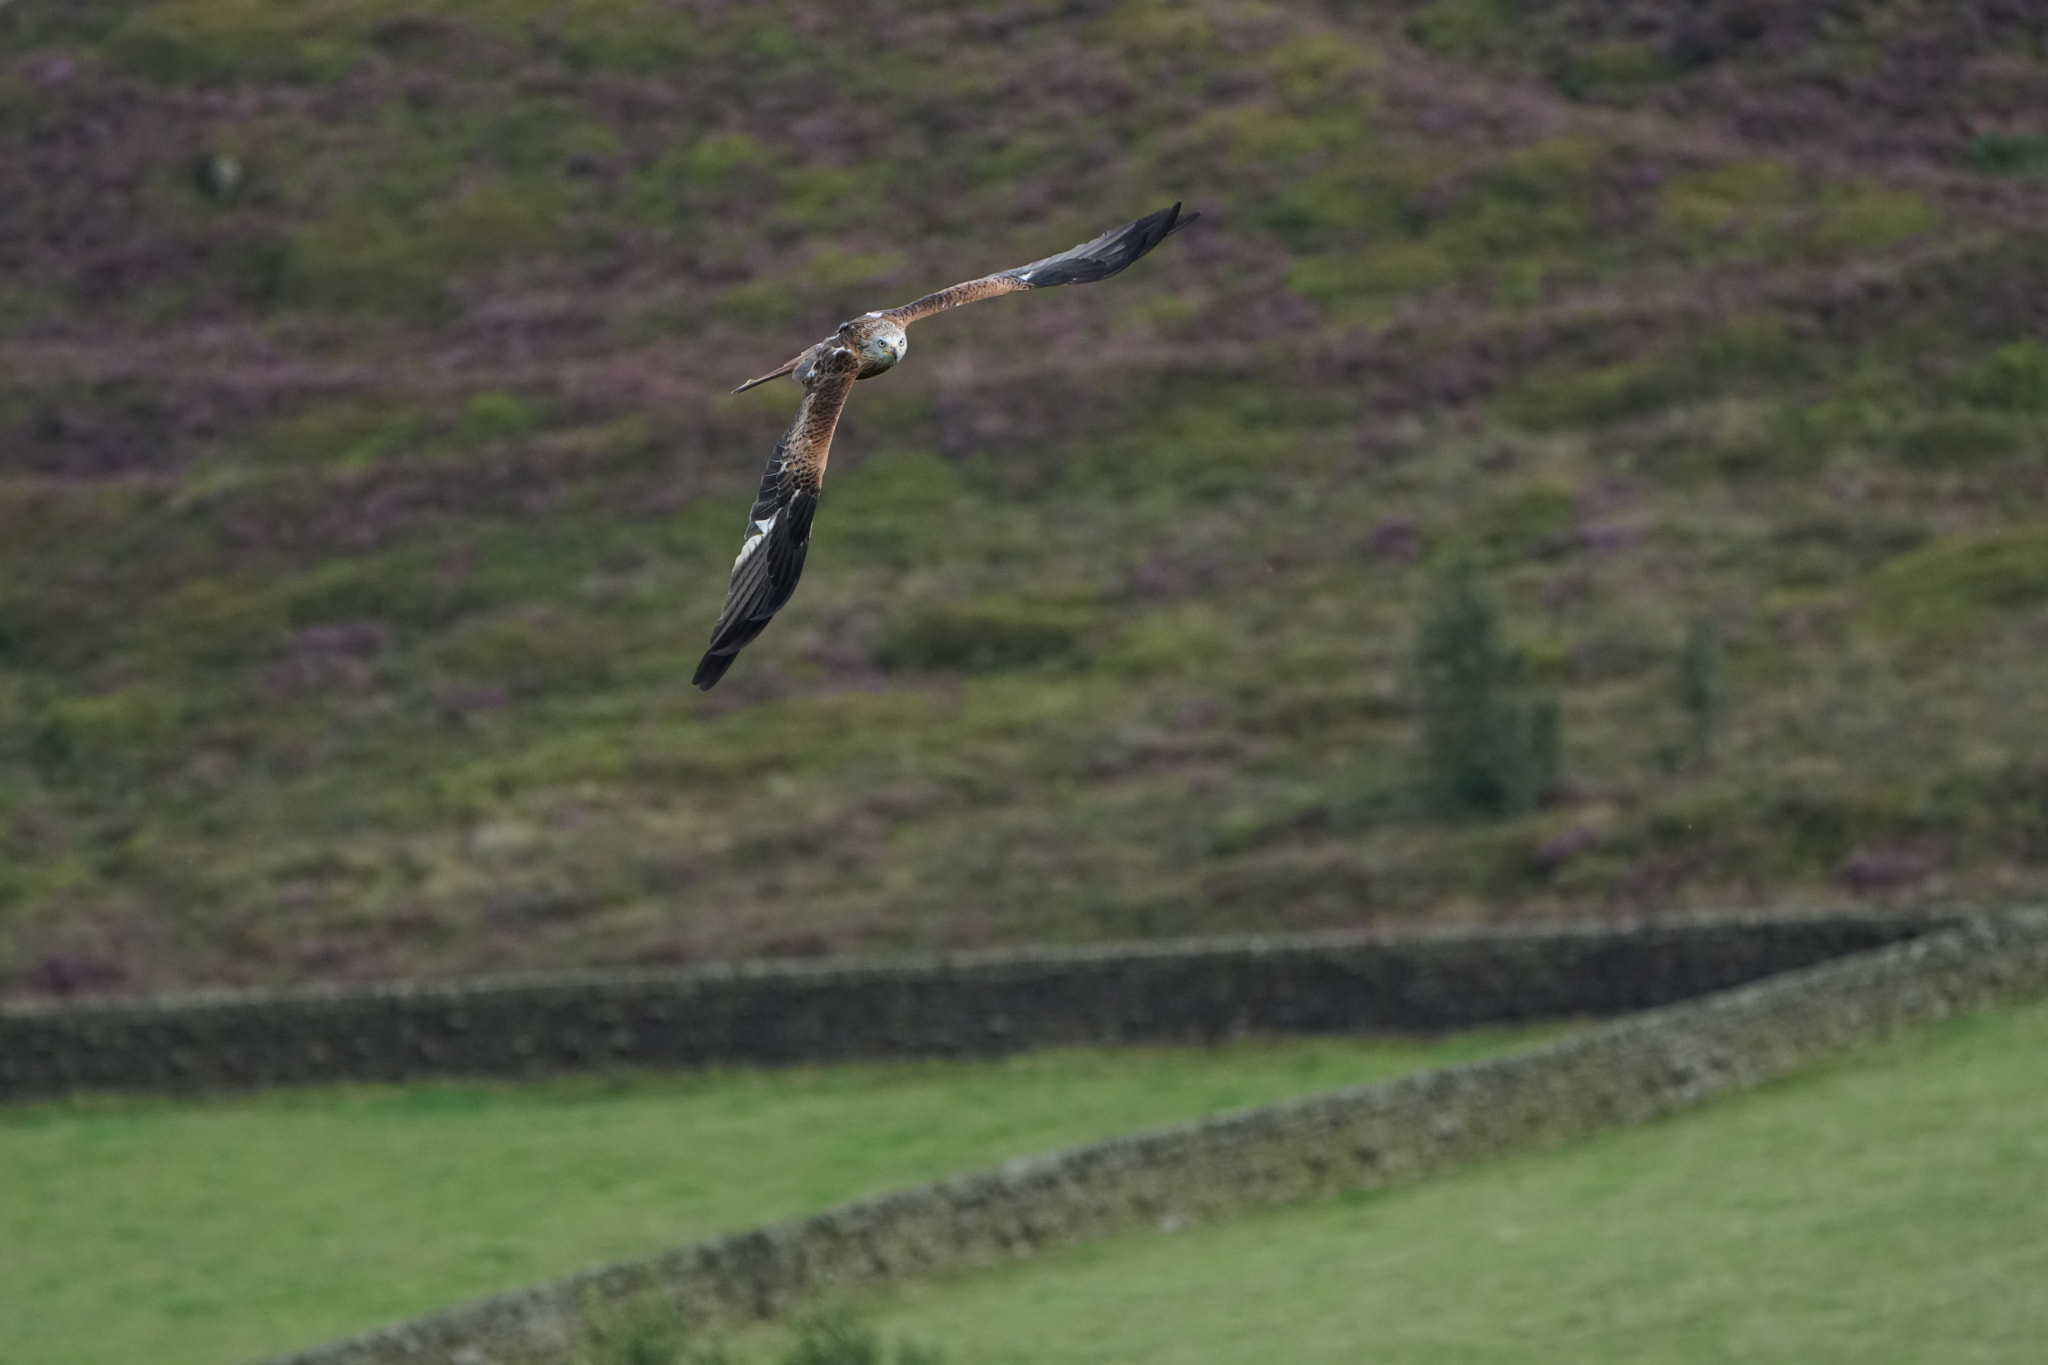 Sony a6500 sample photo. Red kite in flight photography